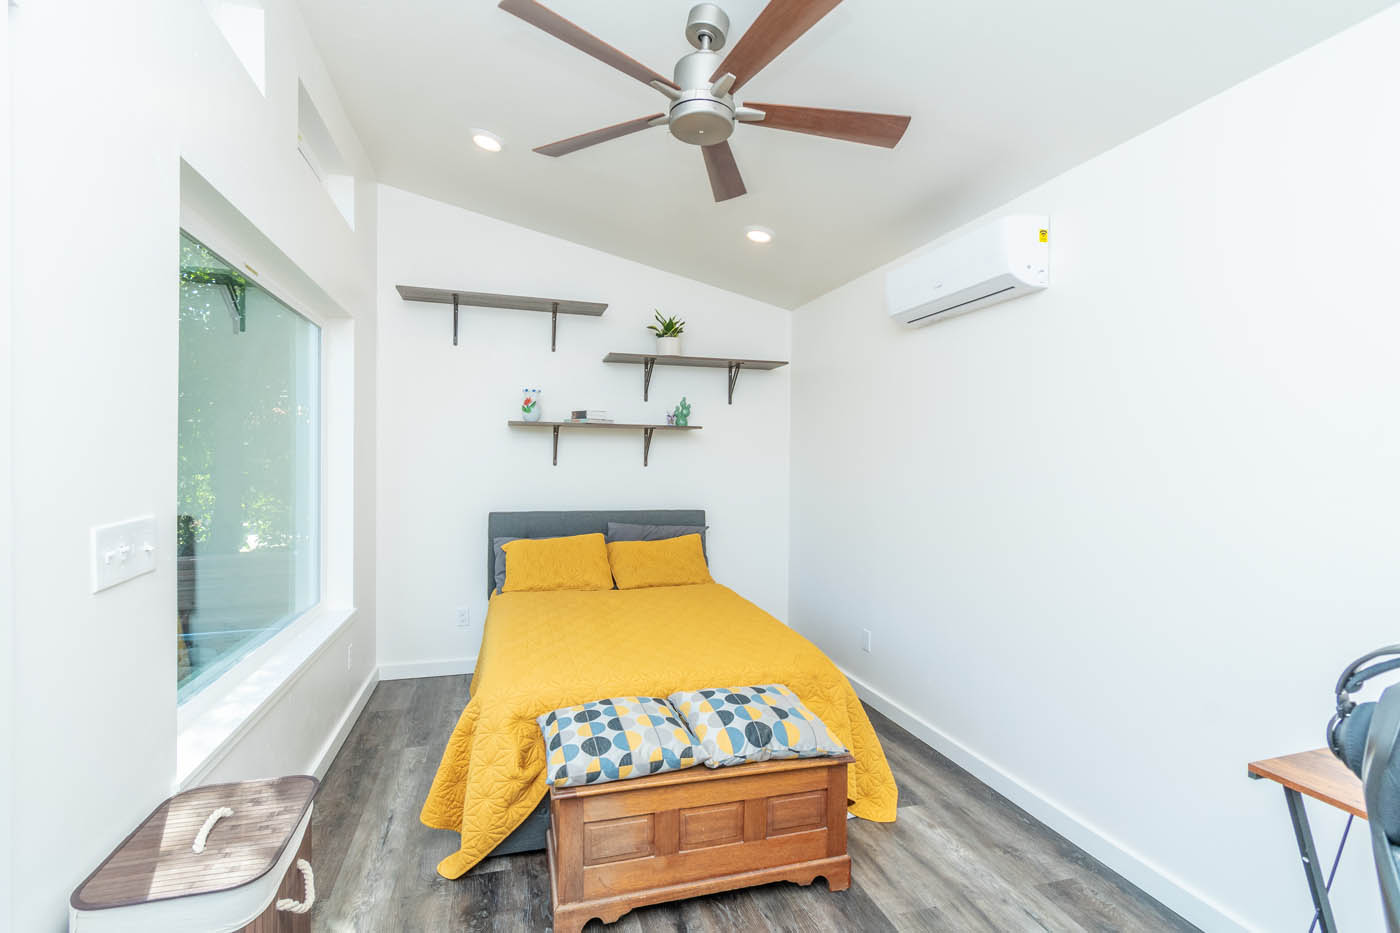 A one bedroom adu model built by professionals at Anchored Tiny Homes Jacksonville.